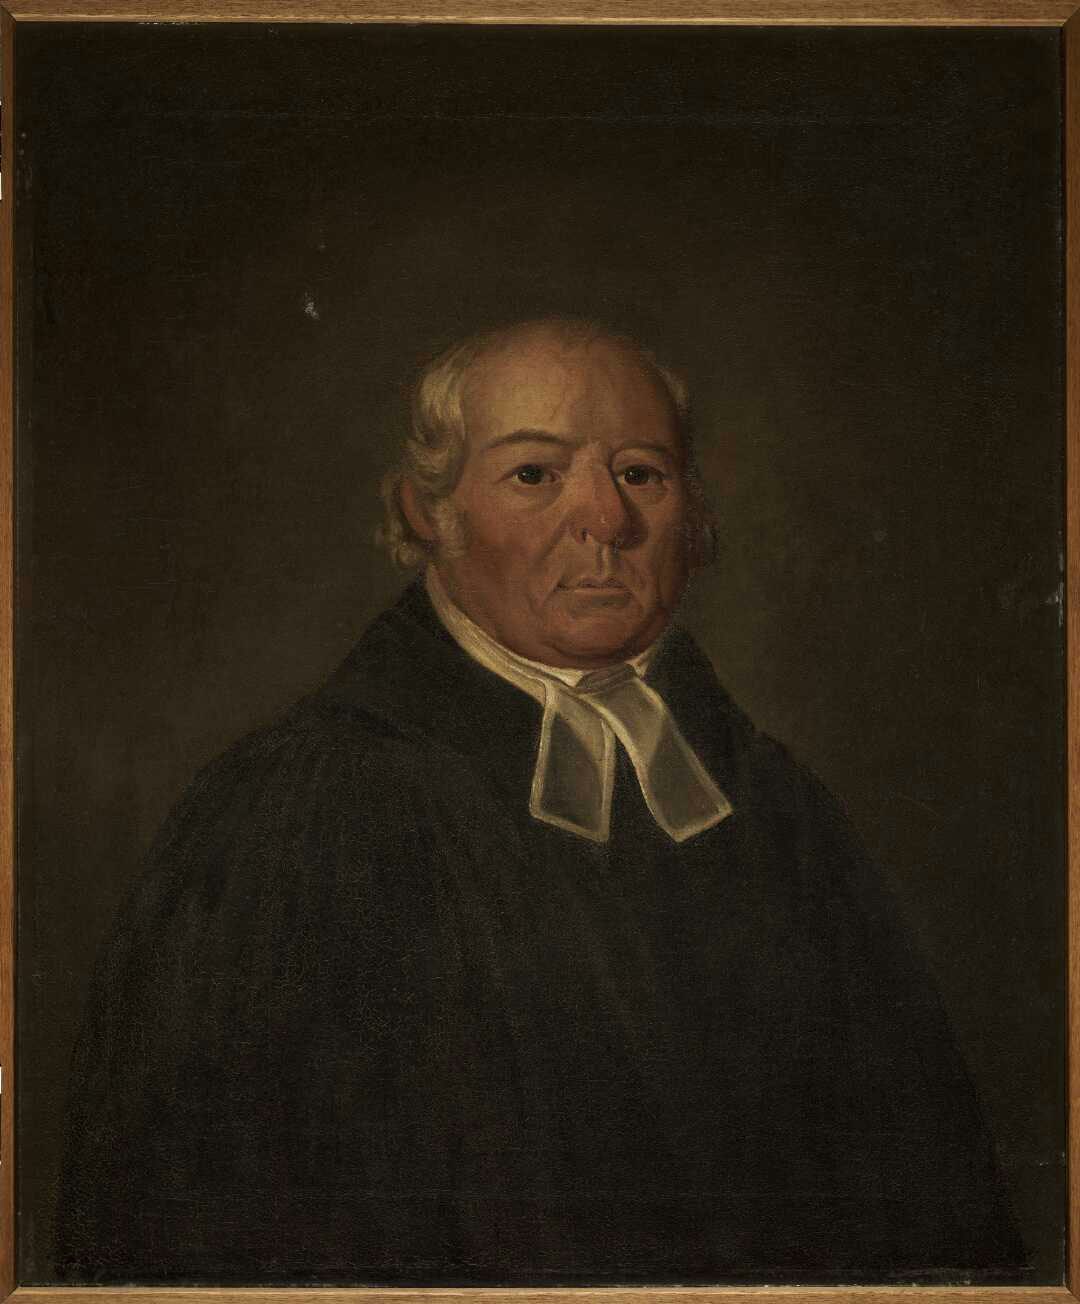 An oil painting of a middle-aged man wearing a black coat and white neck tie